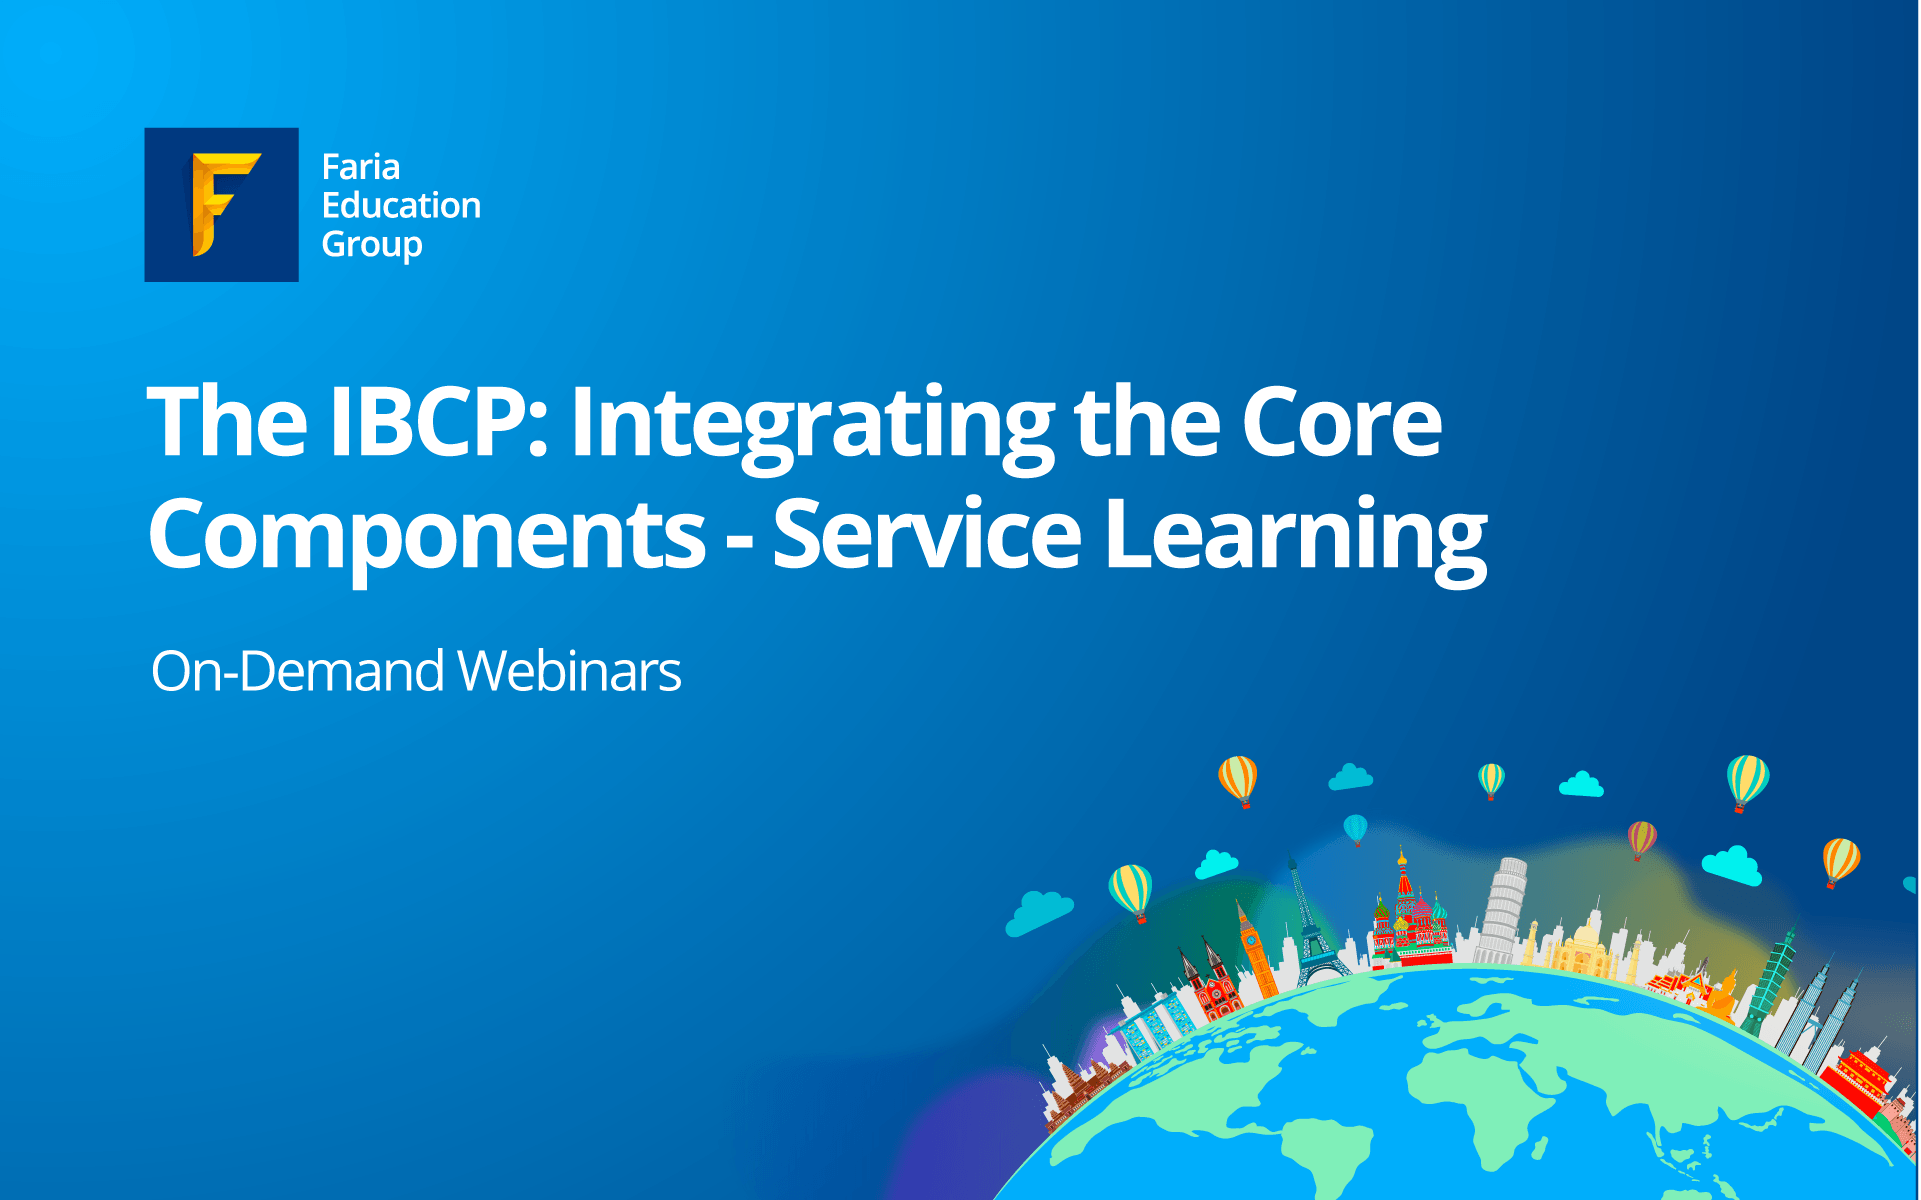 The IBCP: Integrating the Core Components - Service Learning